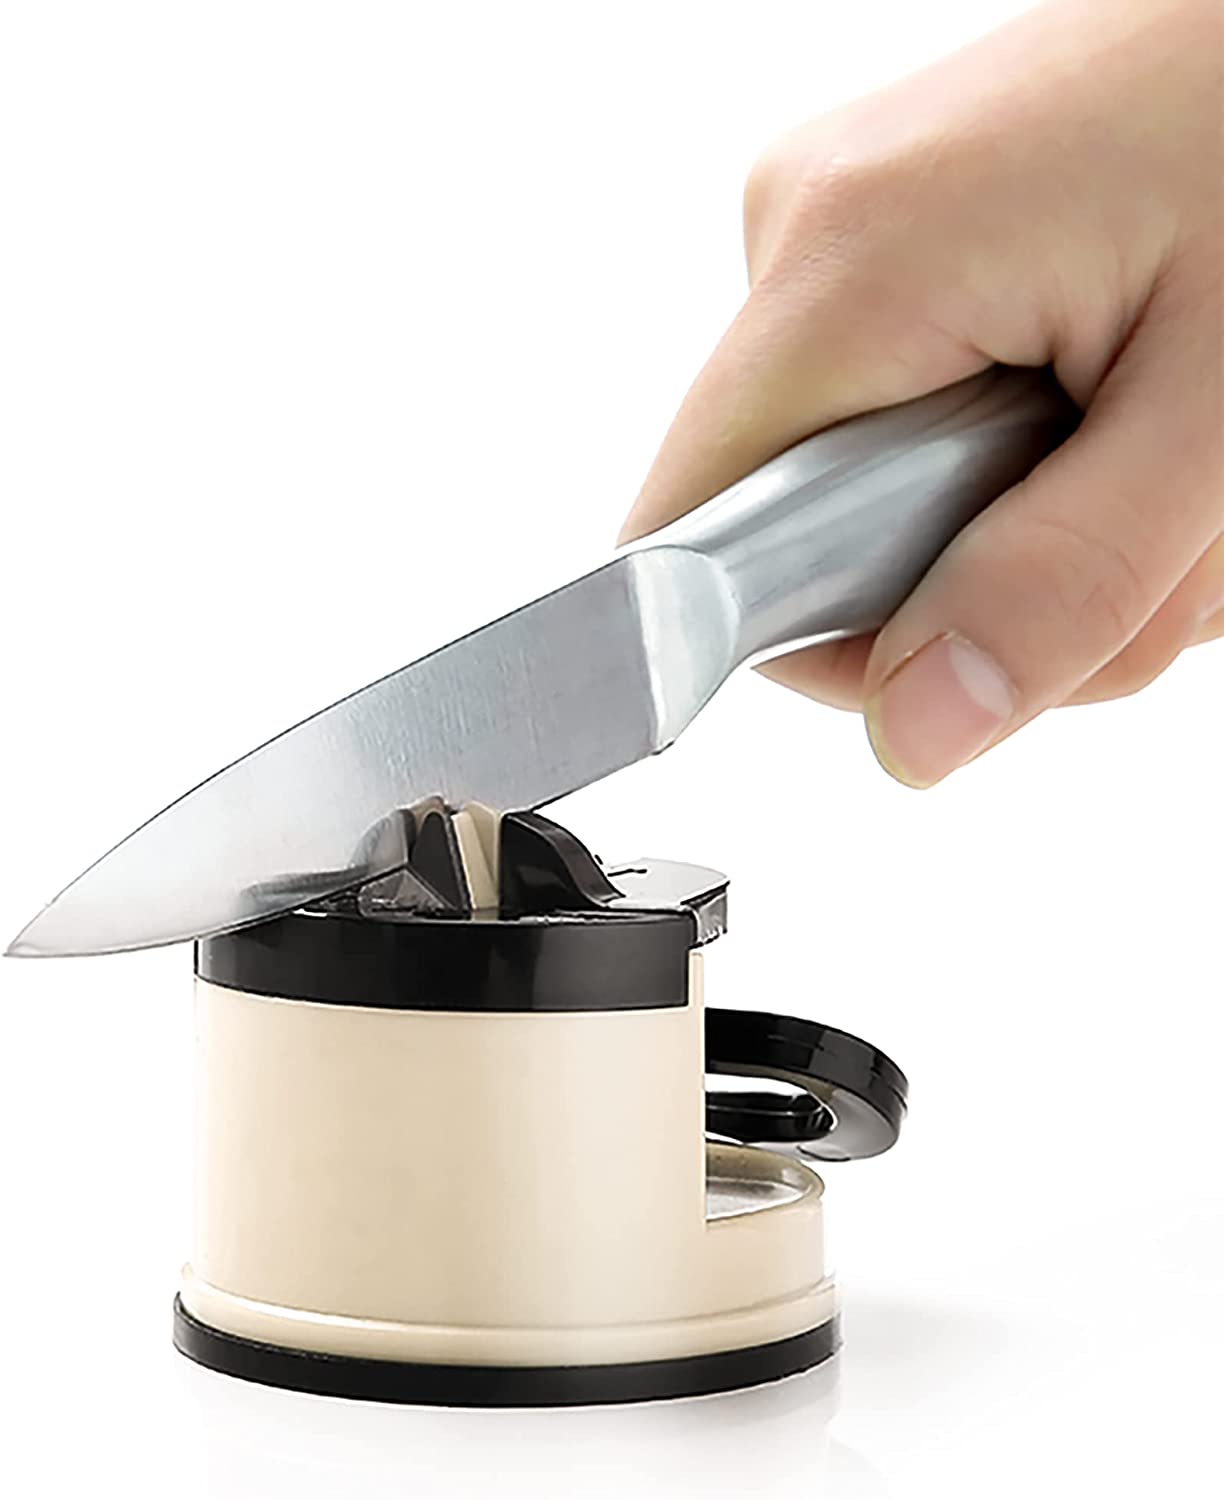 Knife Sharpeners, Mini Knife Sharpeners with Suction Base, Pocket Knife Sharpeners Suitable for Most Blade Types, knife sharpeners for kitchen knives, Gold